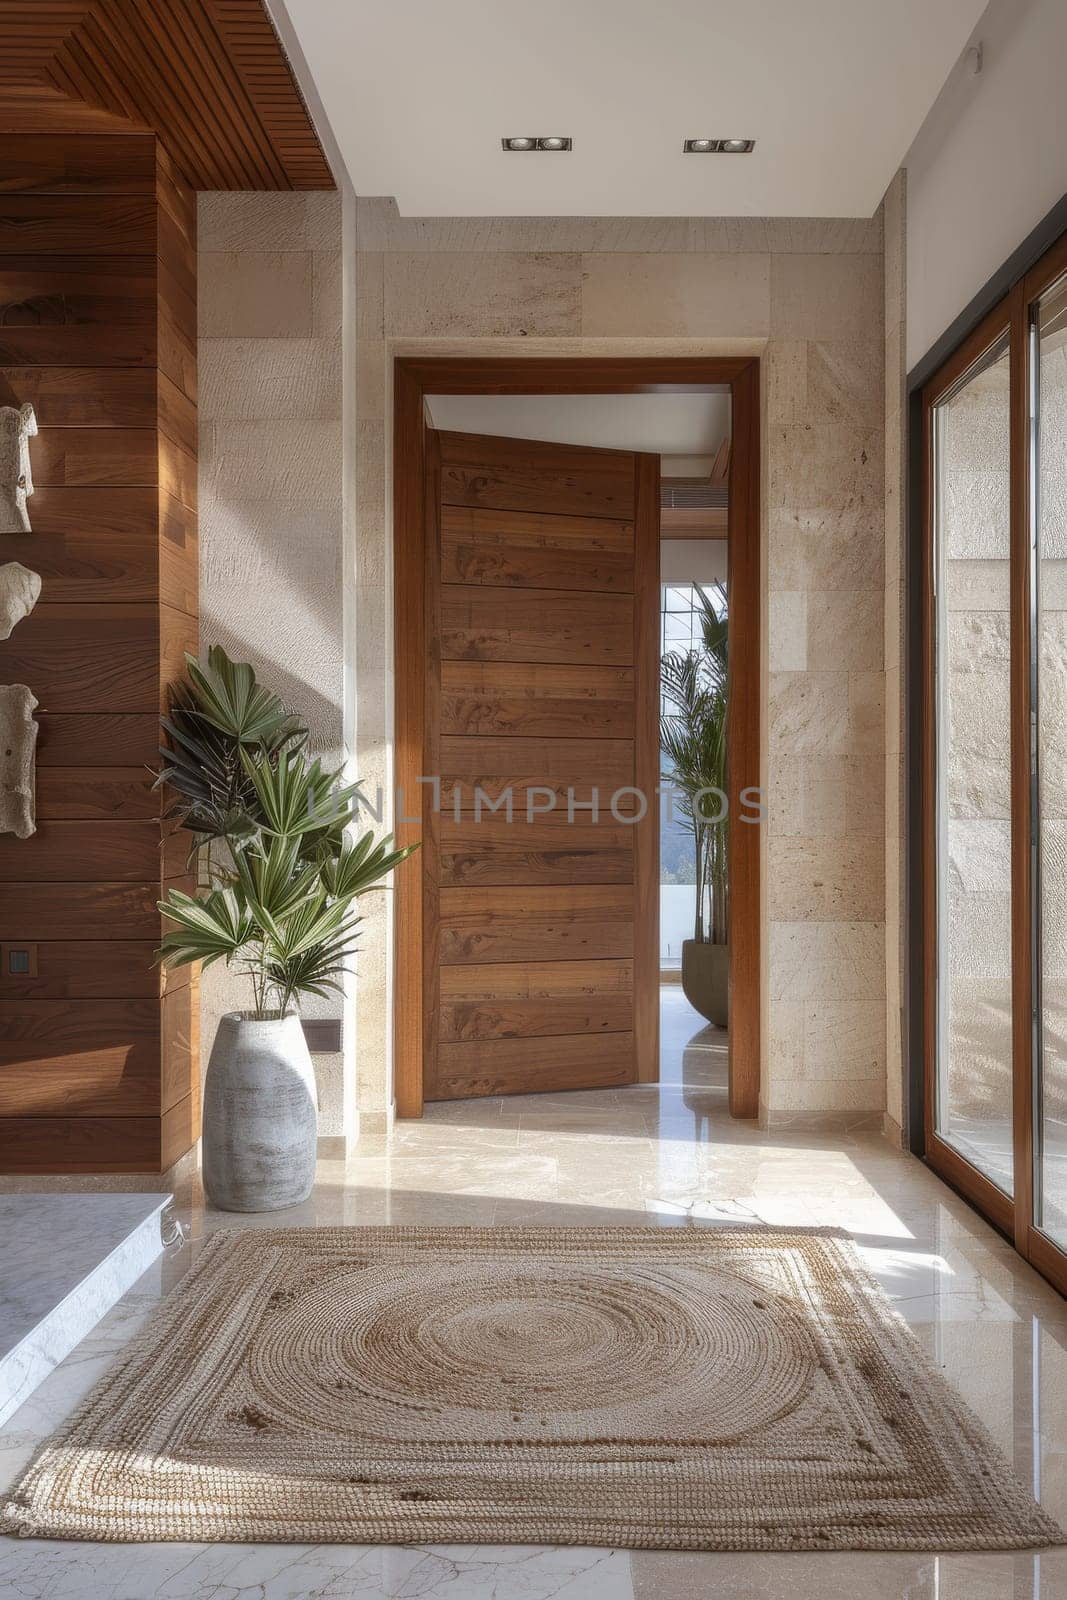 A large wooden door with a glass panel in front of it. The door is open and there is a vase on the floor in front of it. The room is well lit and has a modern feel